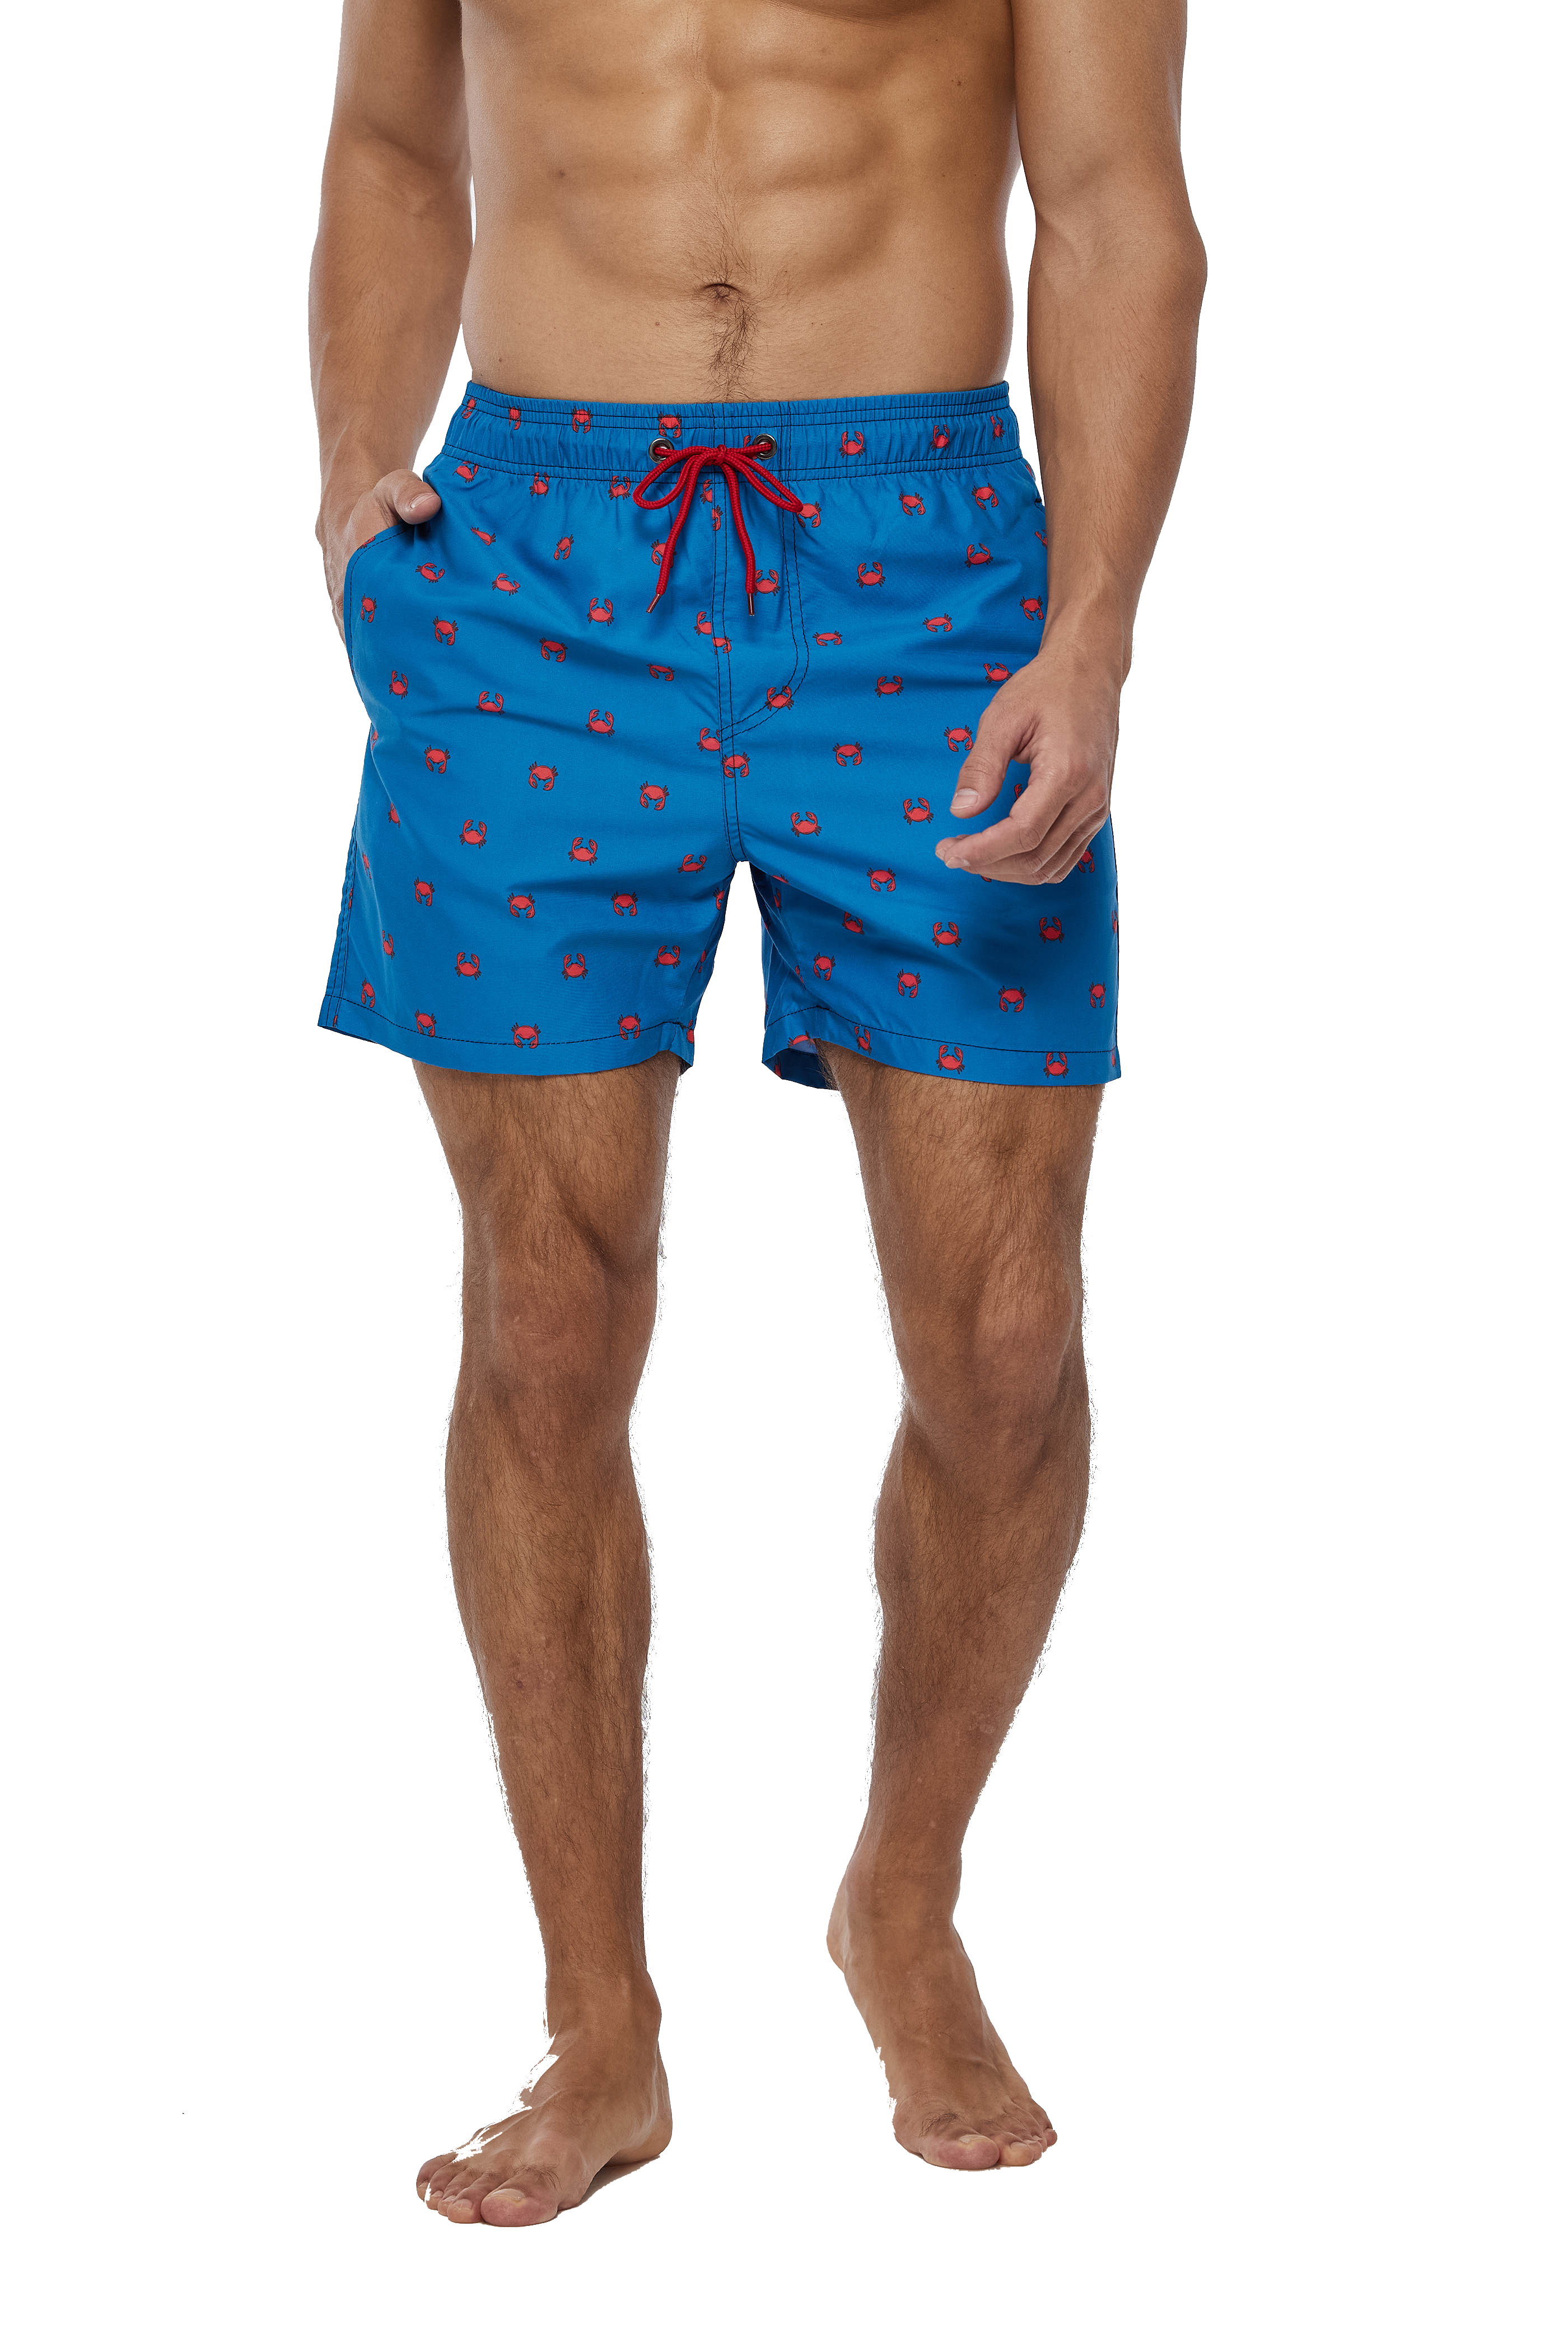 Man earing a pair of blue and red swimming shorts with hand in pocket. The drawstring is red.